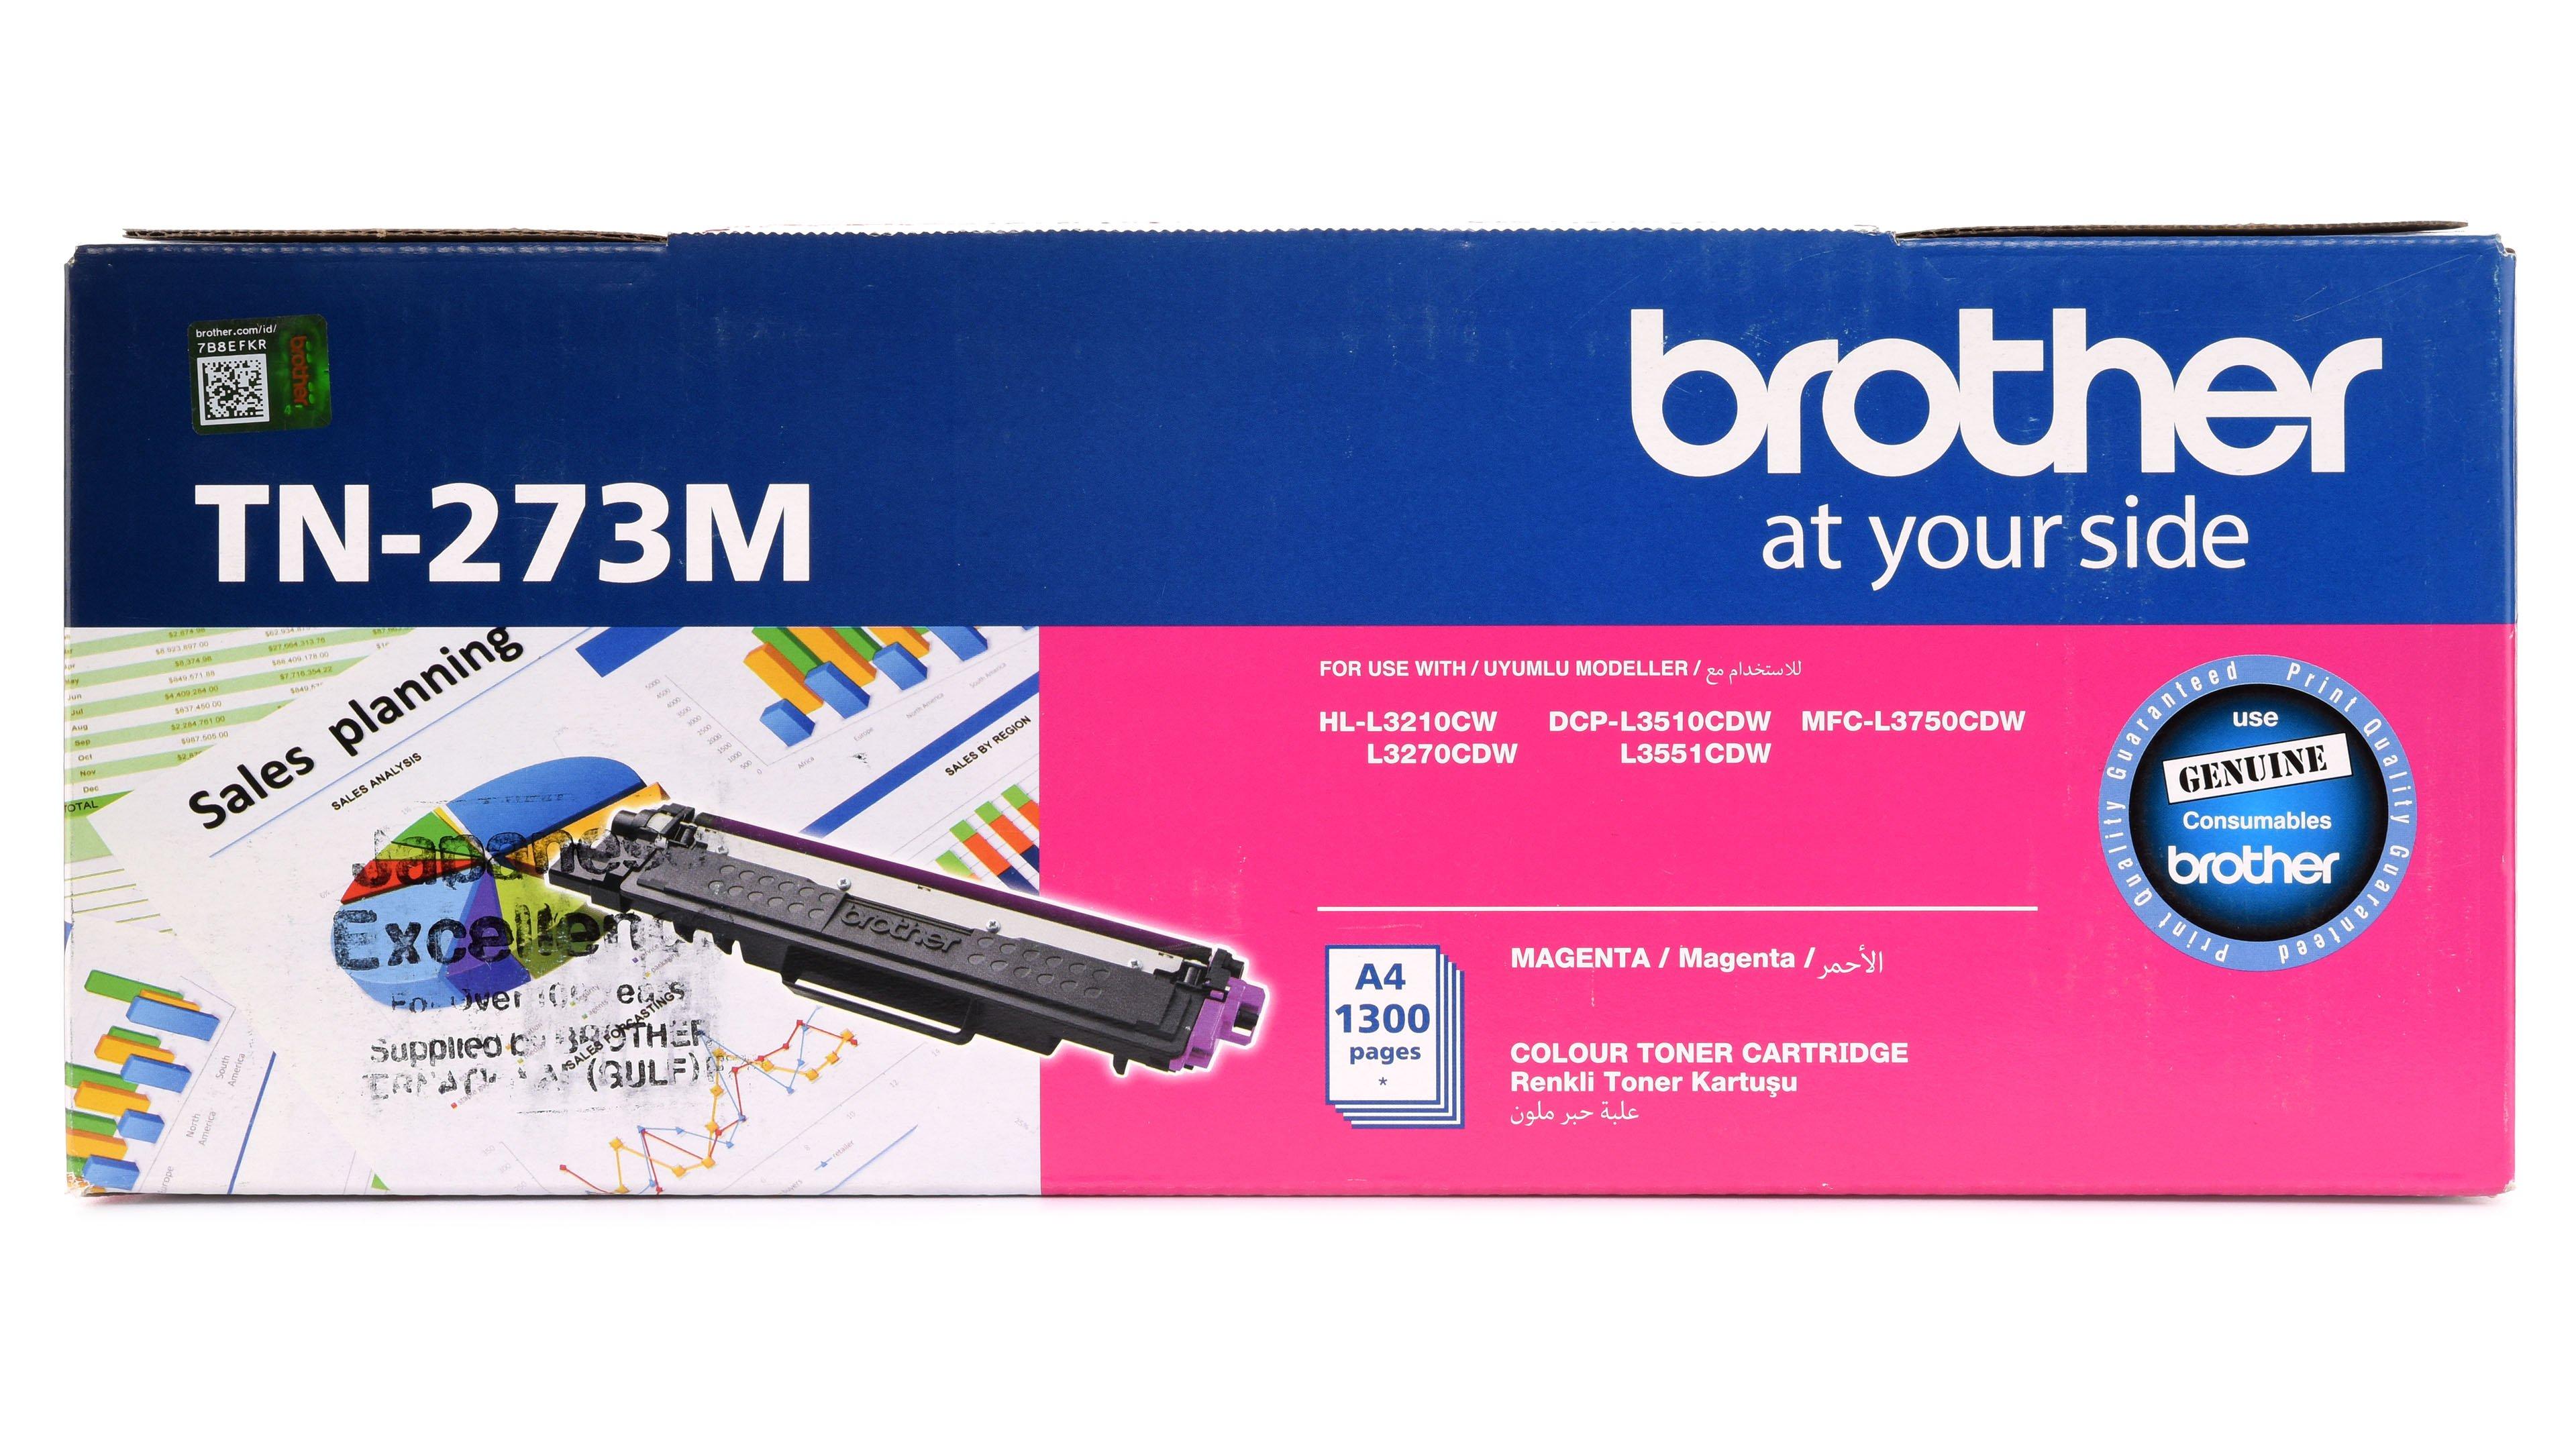 BROTHER Magenta Toner Cartridge,for Colour Laser printers HL-L3270CDW and  DCP-L3551CDW - eXtra Saudi